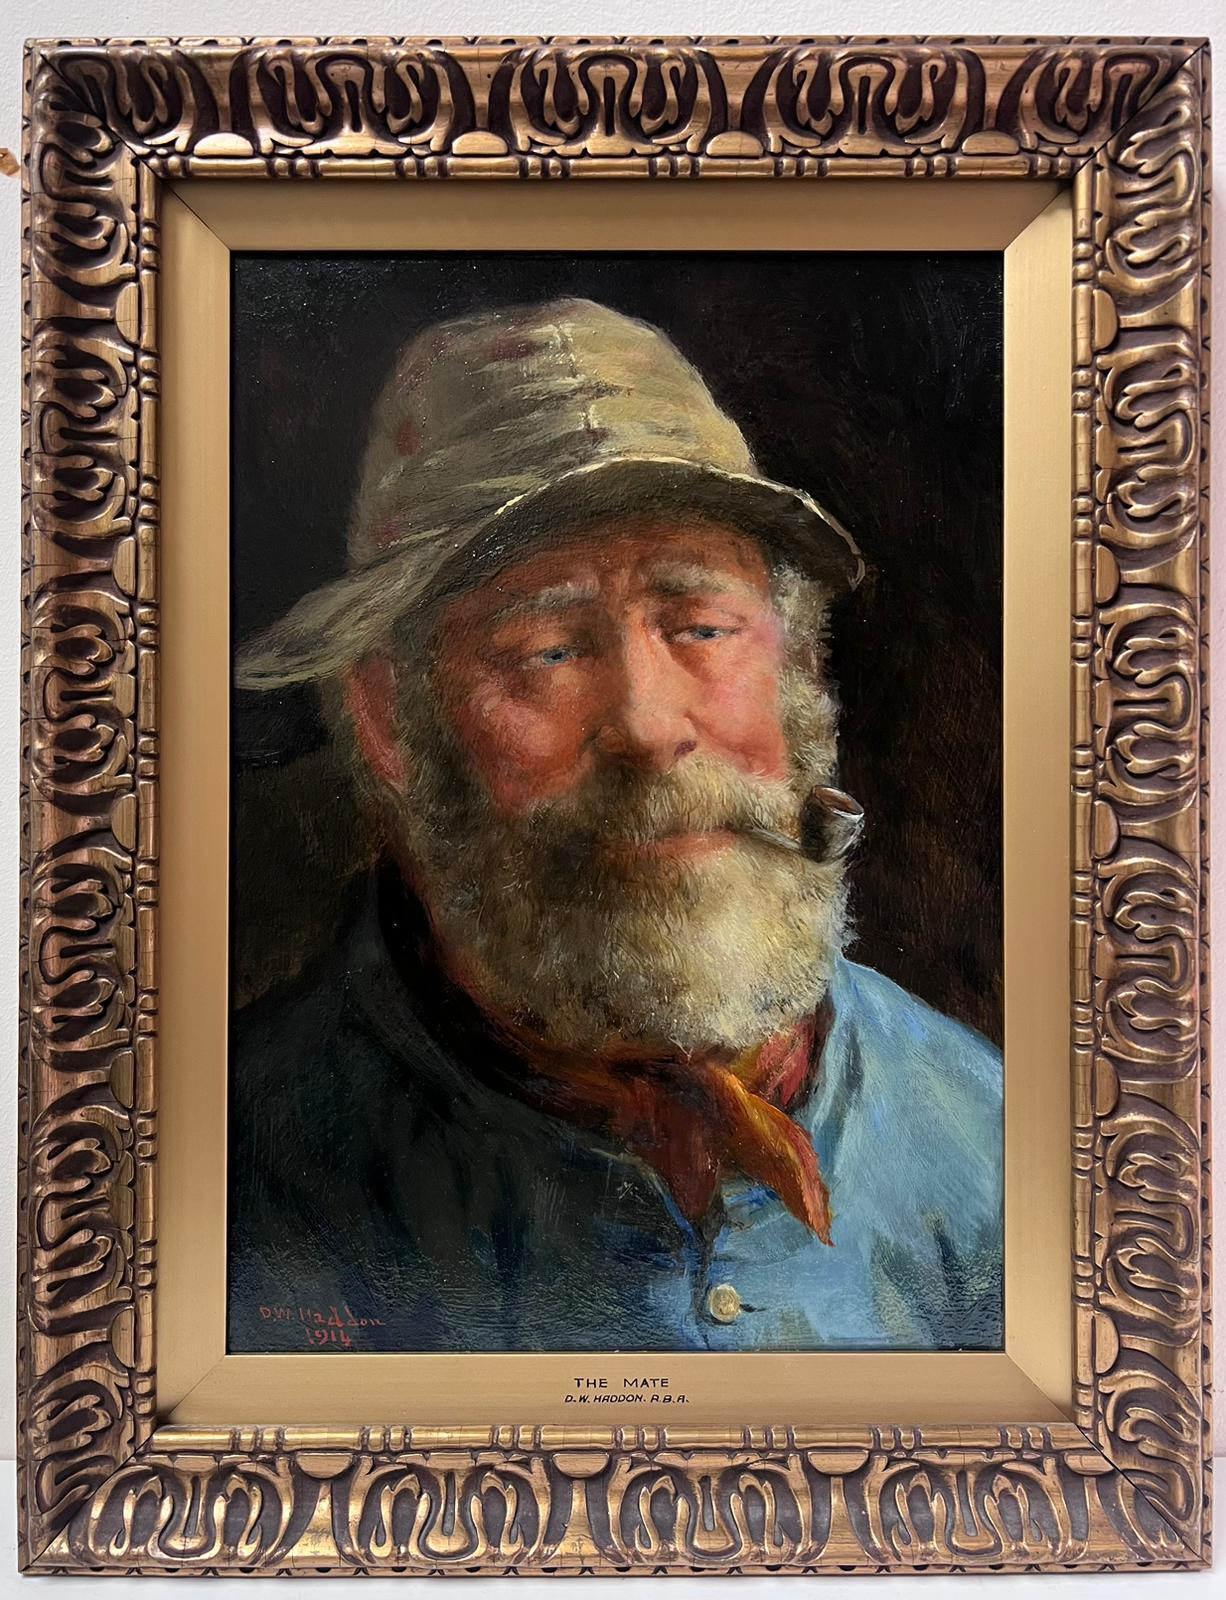 The Cornish Fisherman Antique English Signed Oil Painting Portrait of Sea Man - Black Figurative Painting by David W. Haddon 